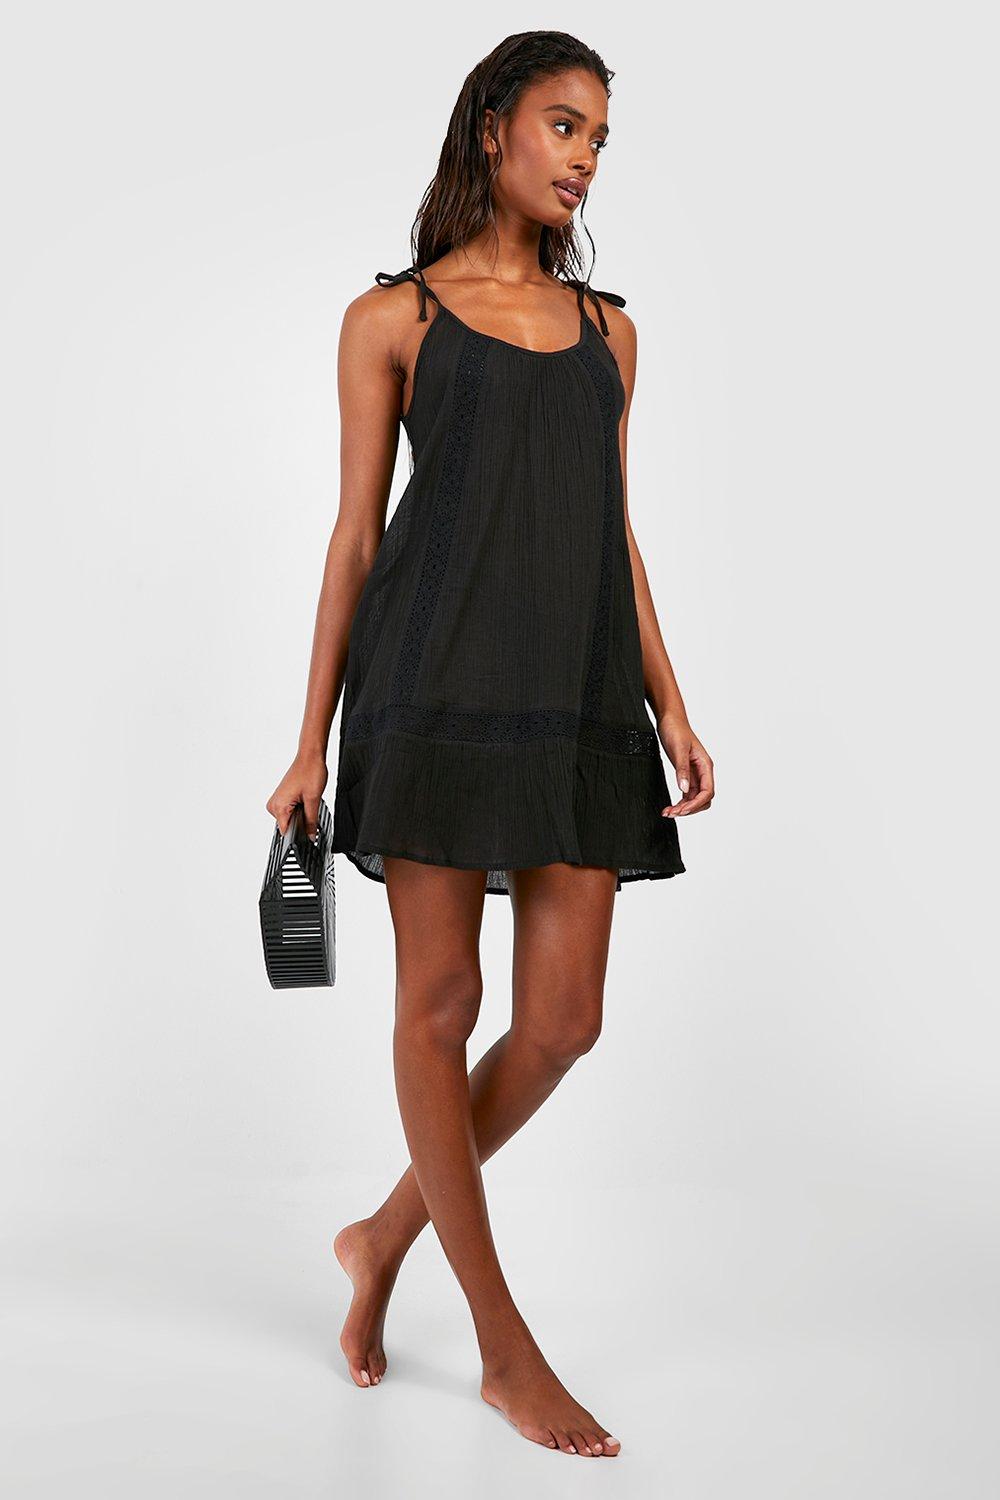 Boohoo Embroidered Cheesecloth Beach Dress- Black  - Size: M